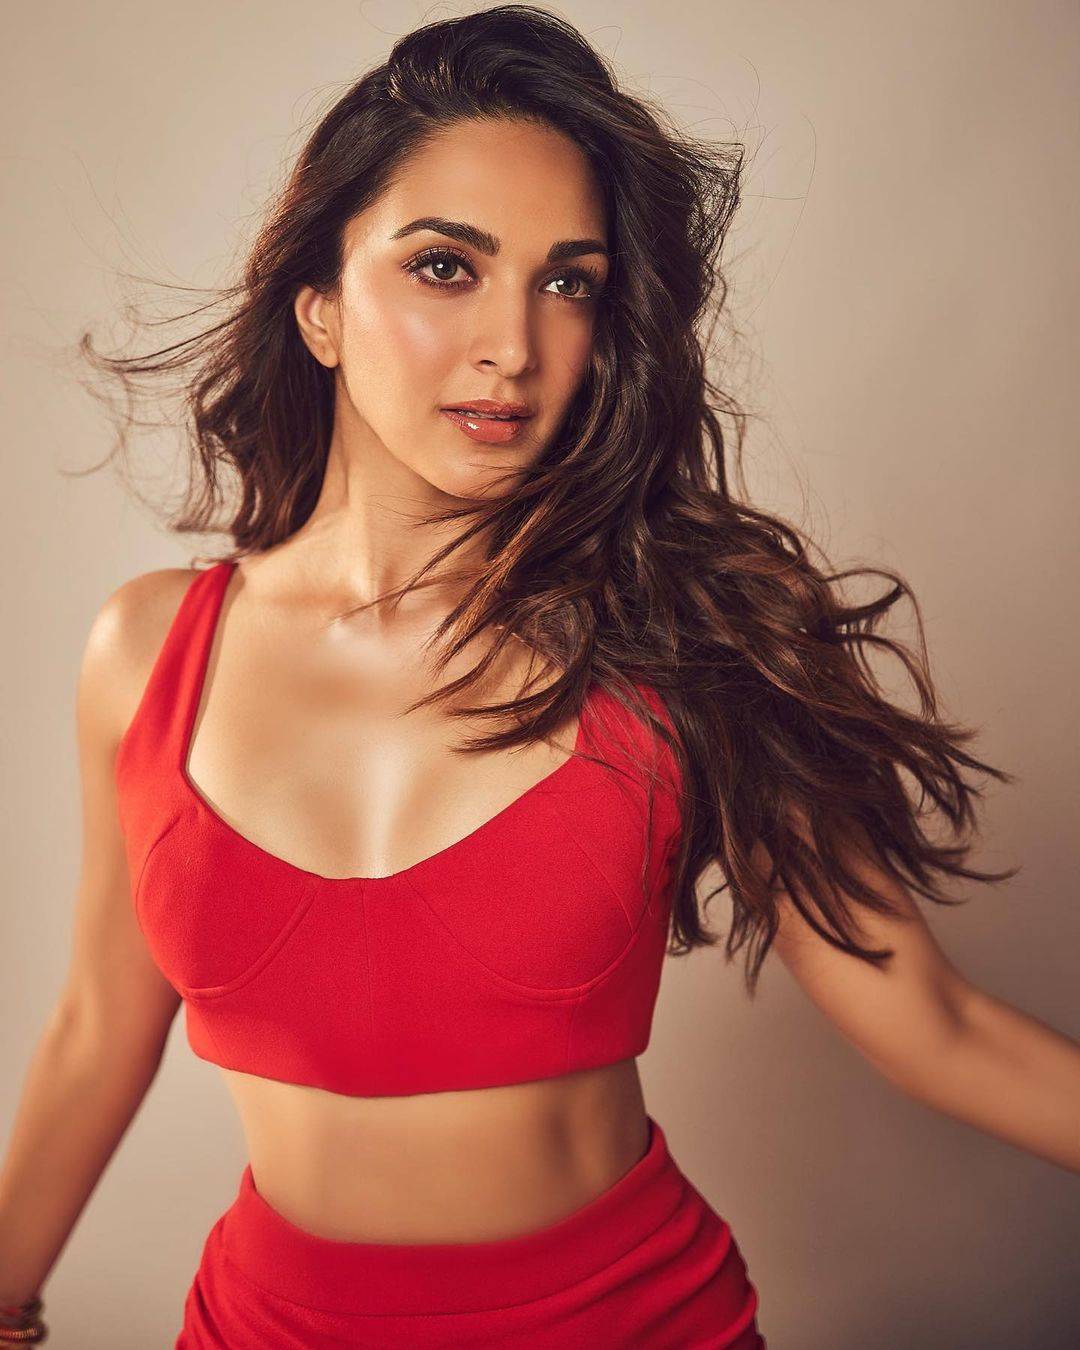 Photos: Kiara Advani showed her curvy figure in the latest photoshoot, See here....